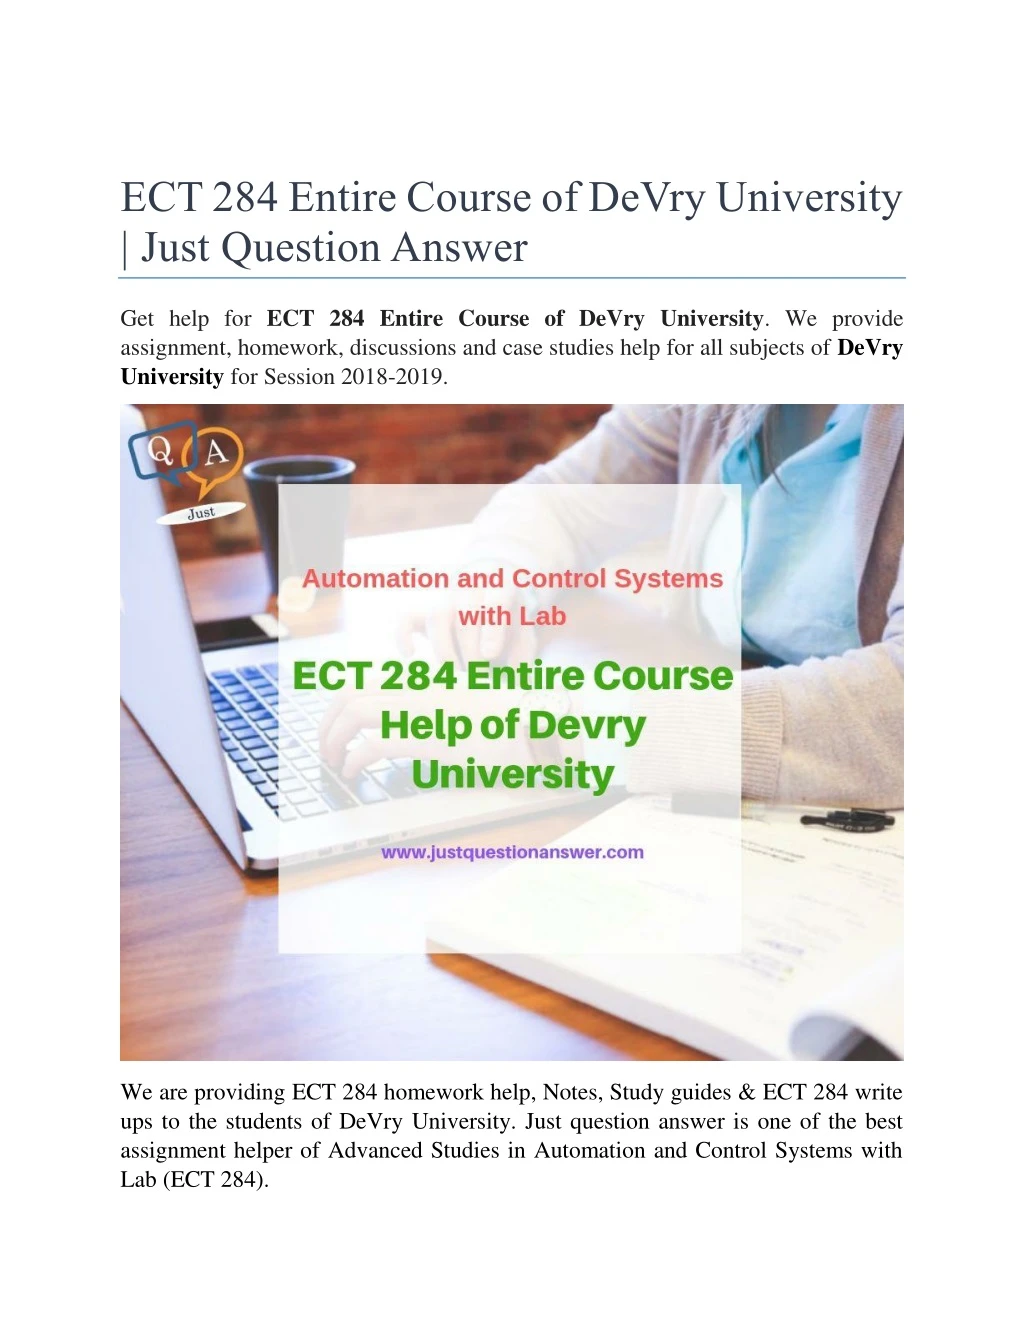 ect 284 entire course of devry university just